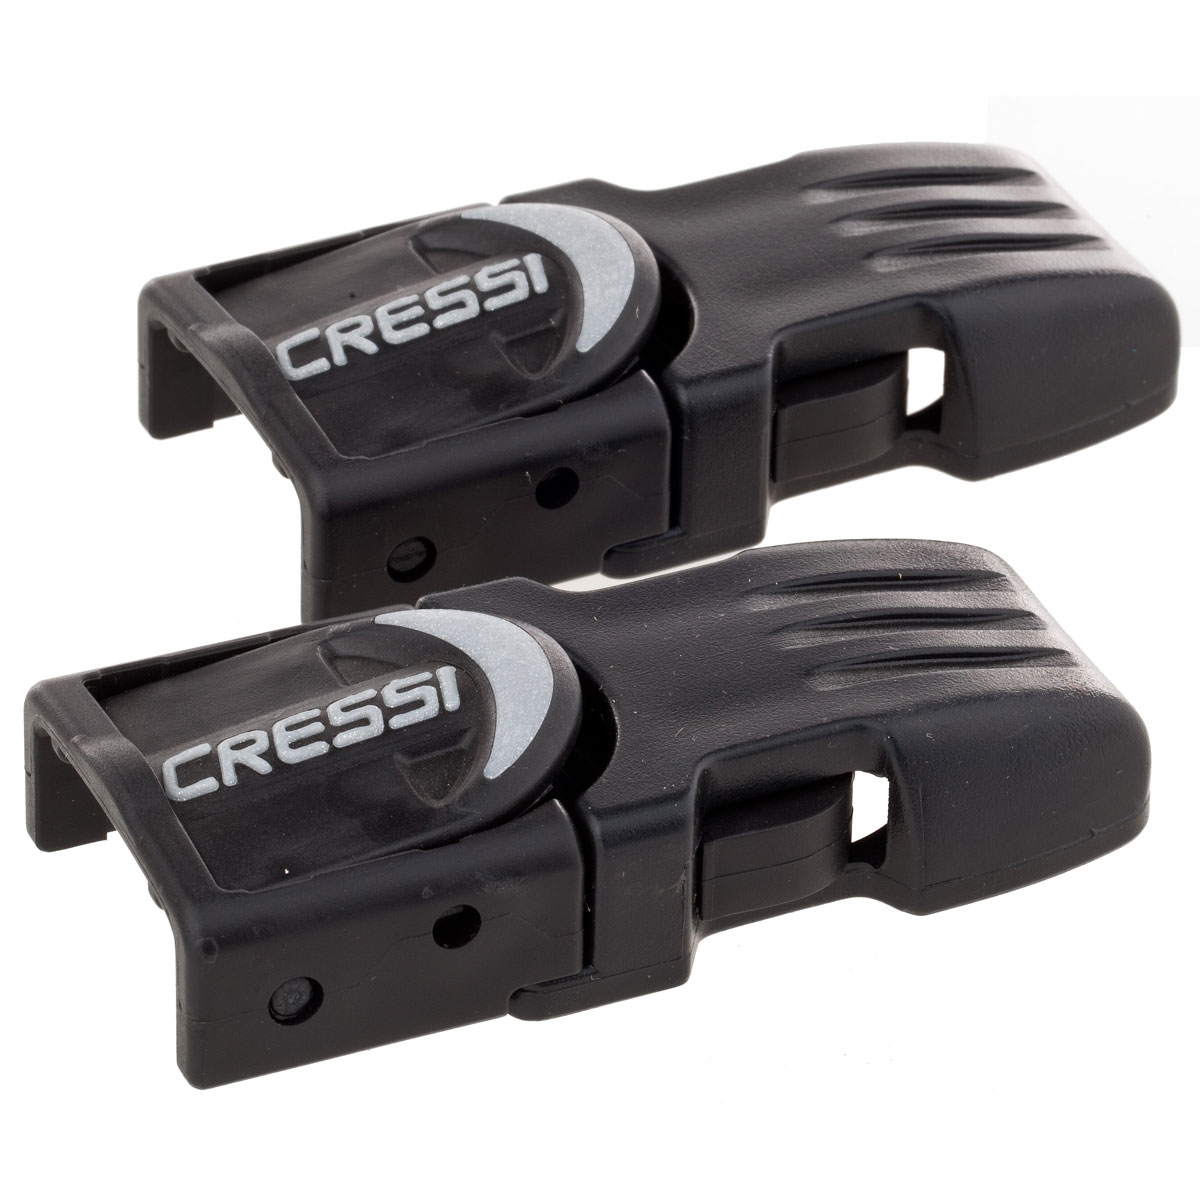 Buckles for Frog/Master Frog/Pro Light by Cressi